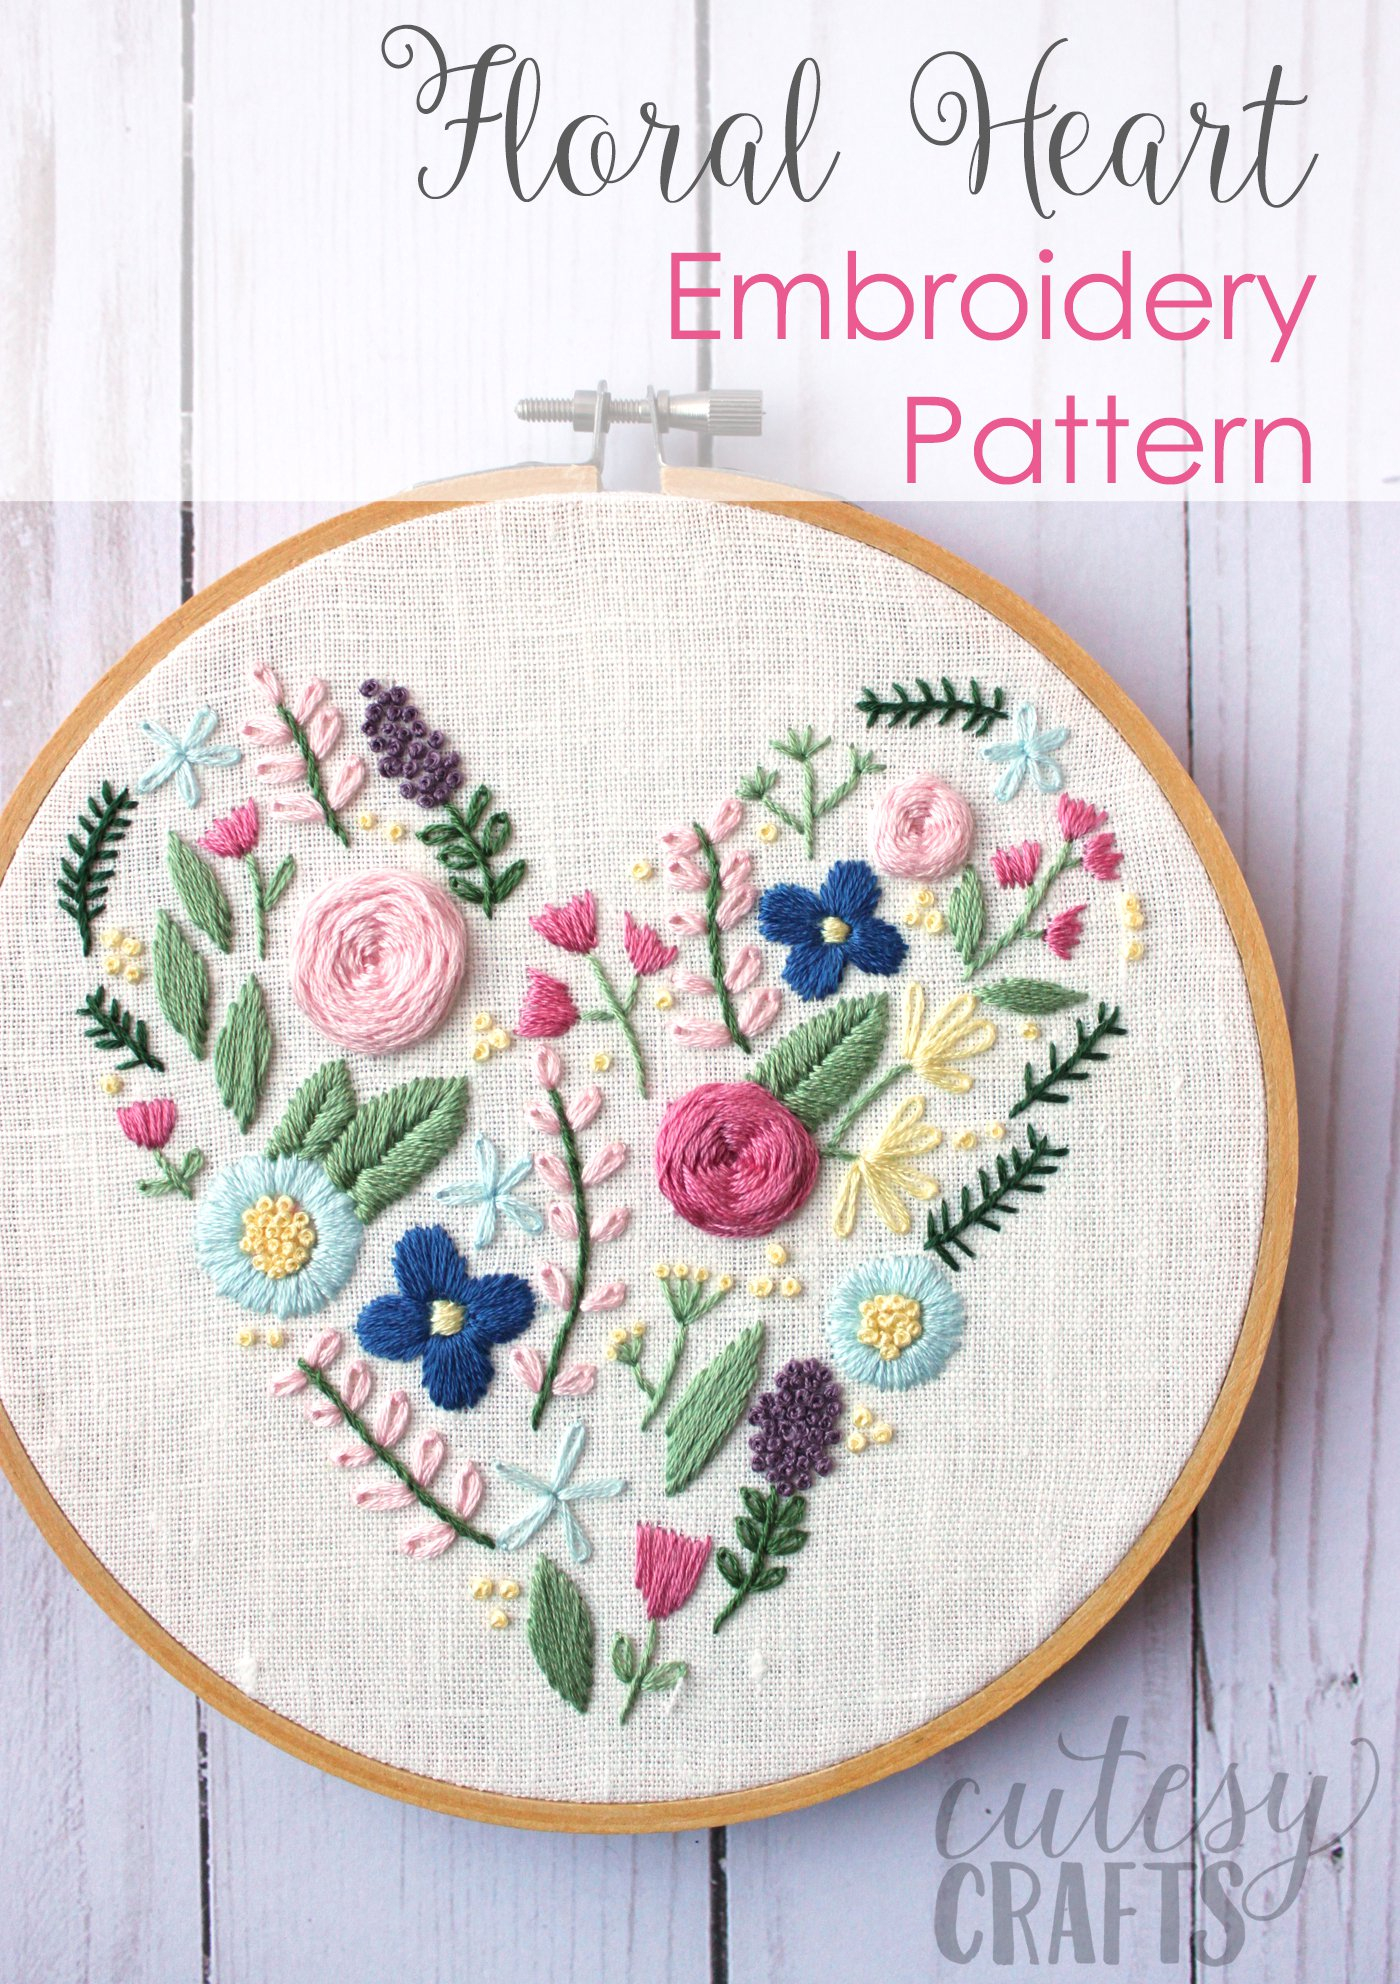 Free Hand Embroidery Patterns To Print Floral Heart Hand Embroidery Pattern The Polka Dot Chair